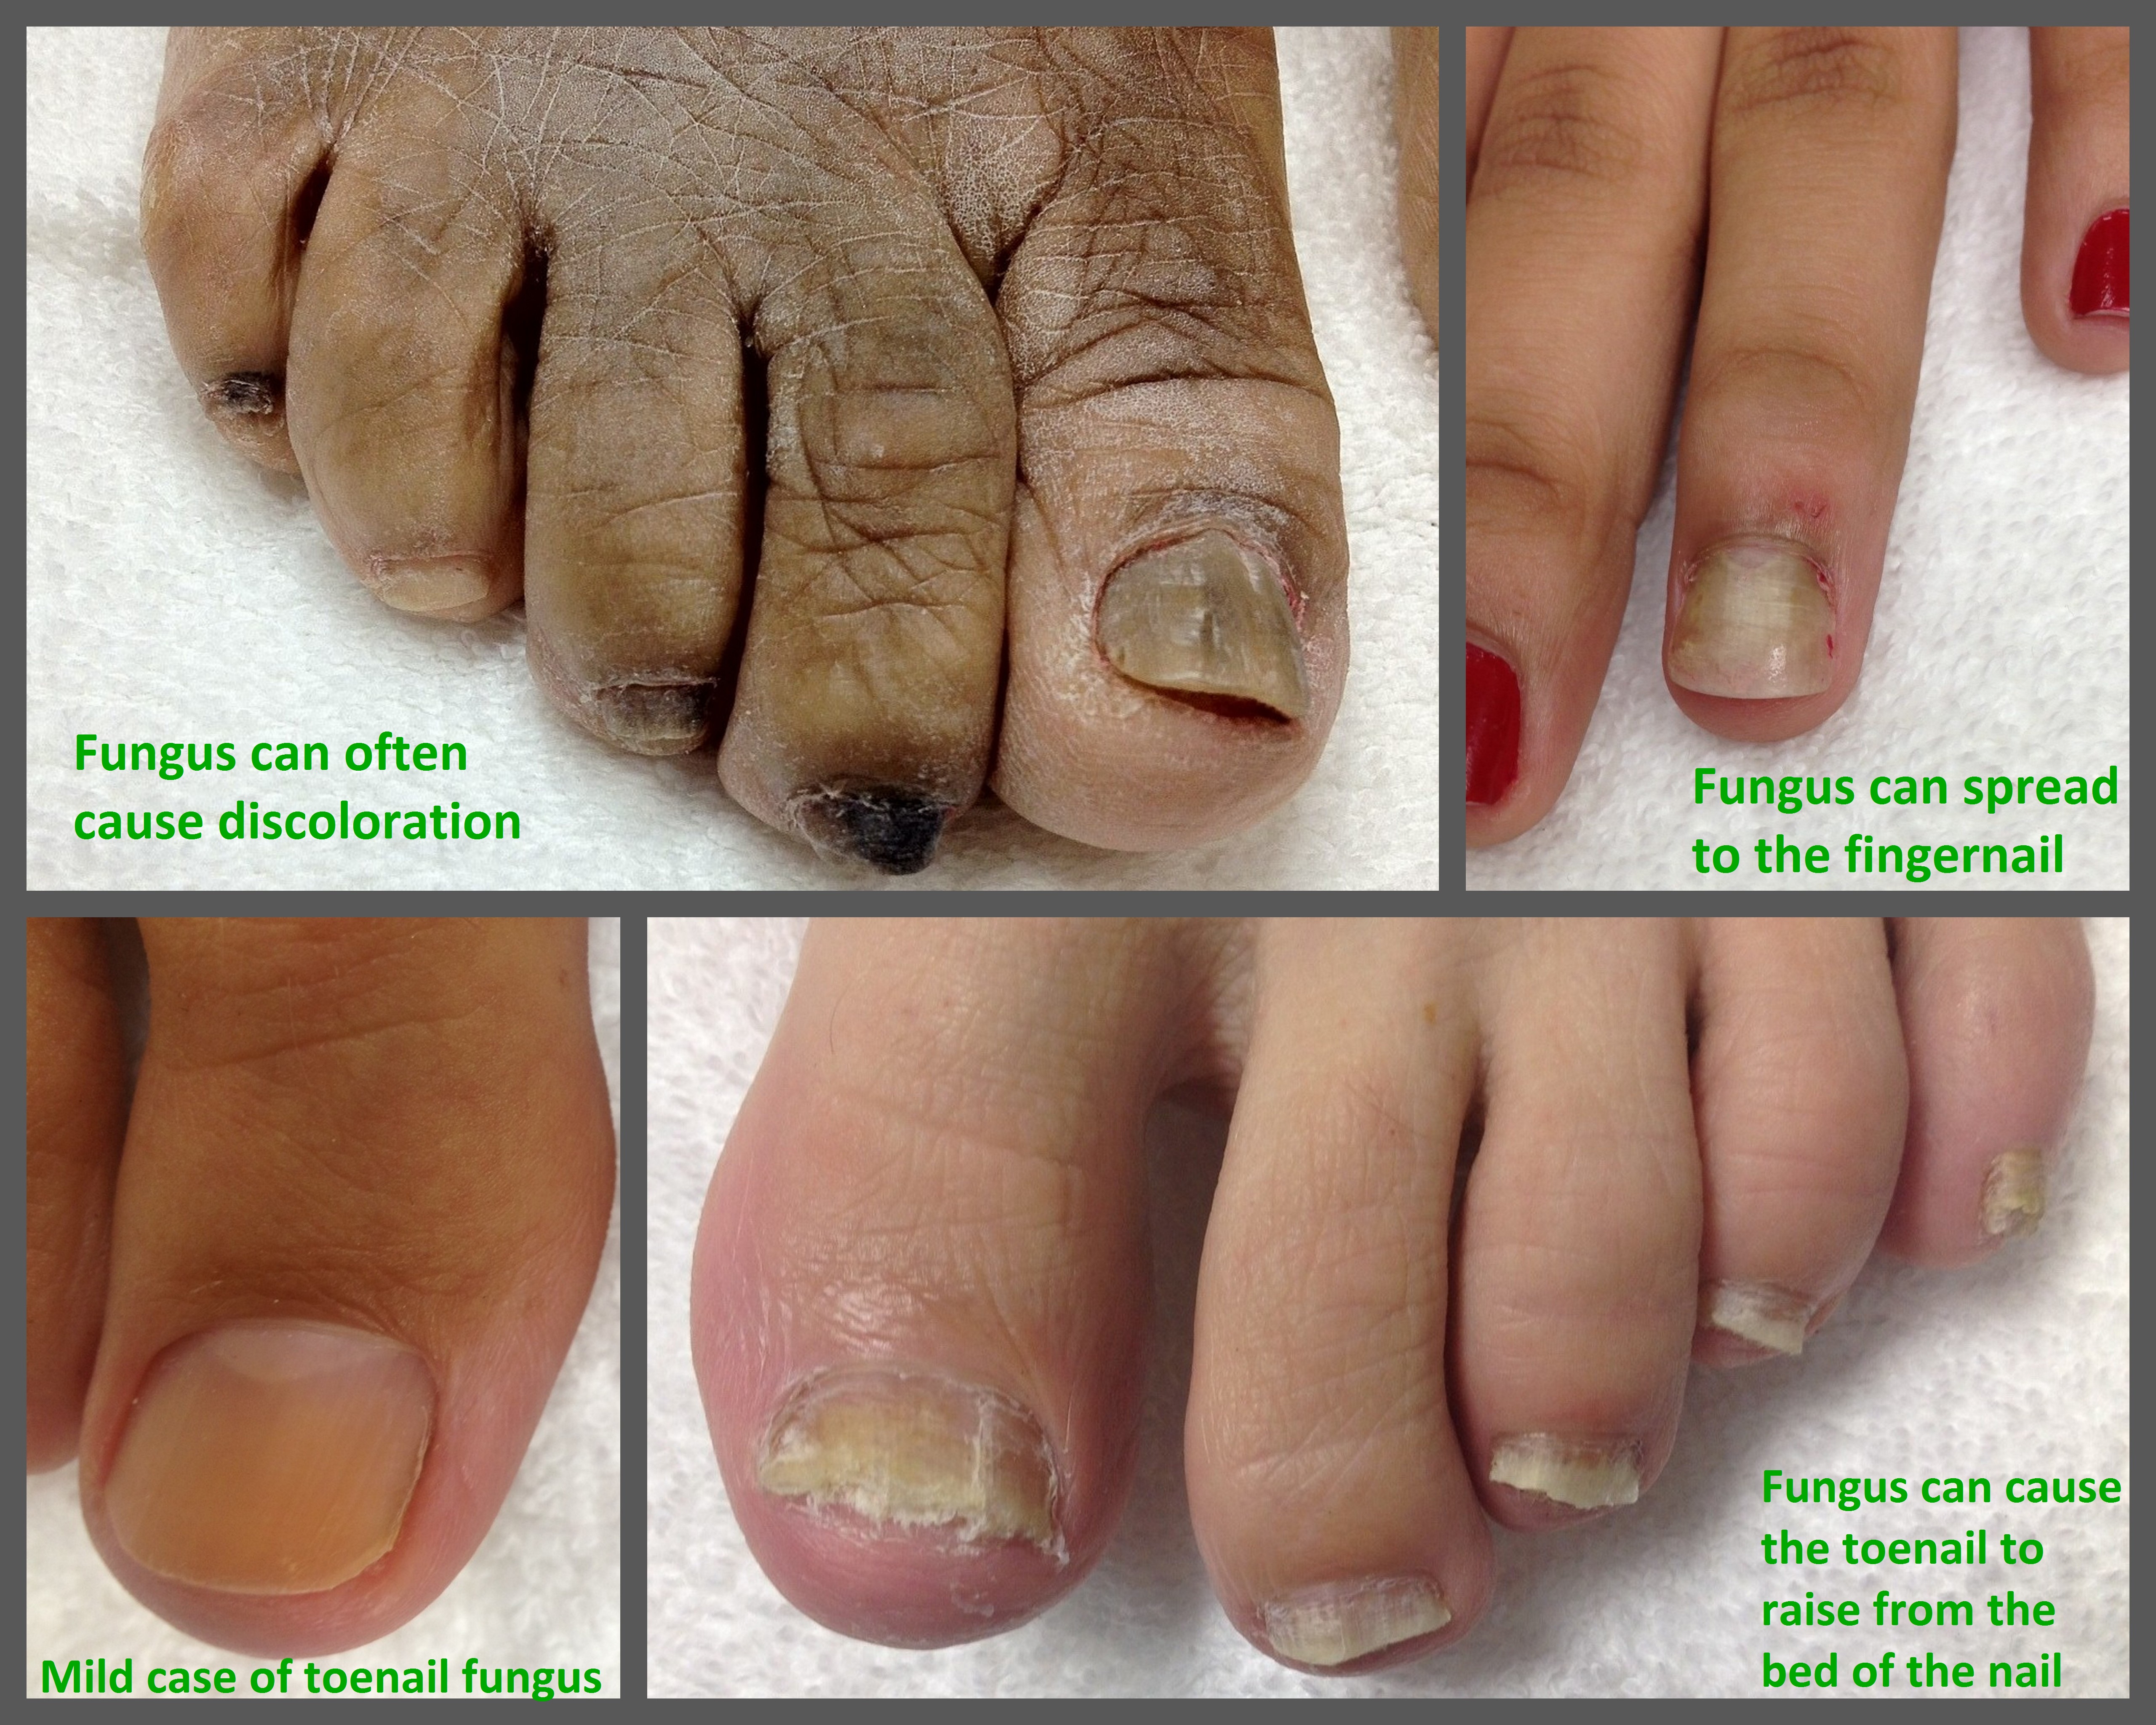 different types of foot fungus - pictures, photos